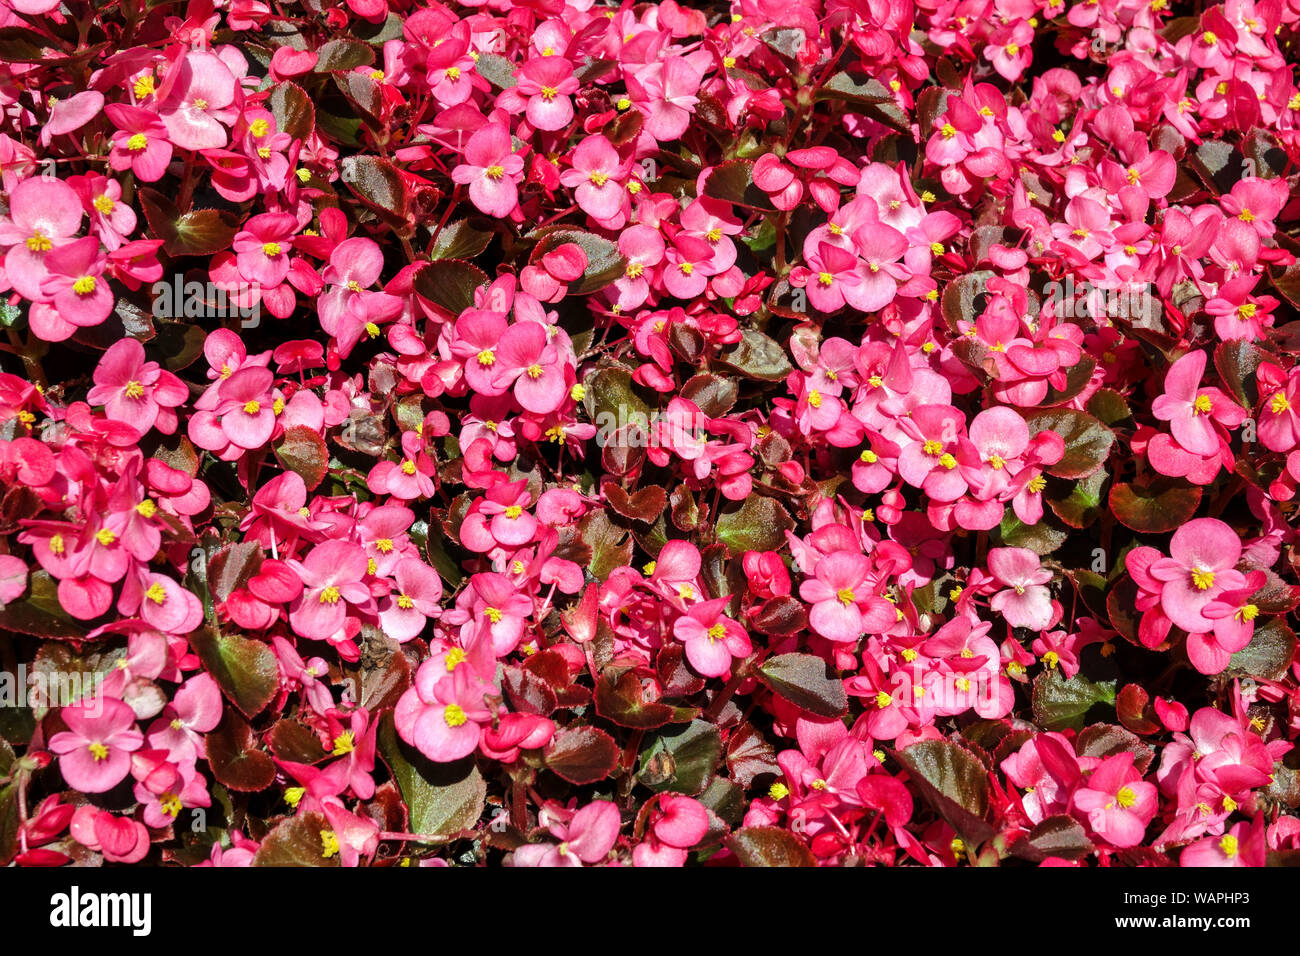 Pink Wax begonia, background with many flowers Stock Photo